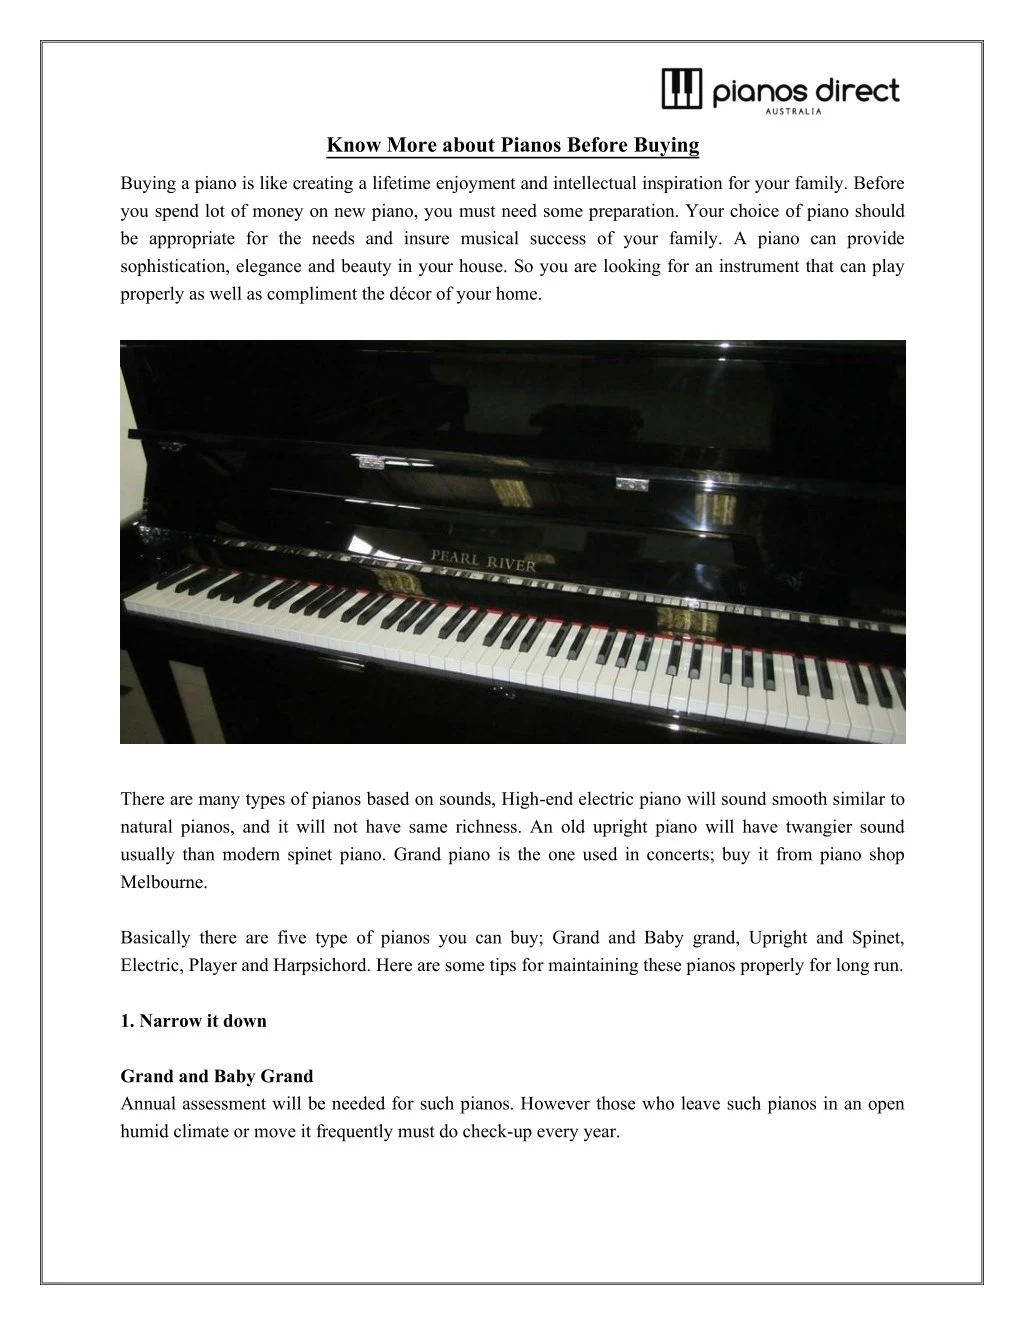 know more about pianos before buying